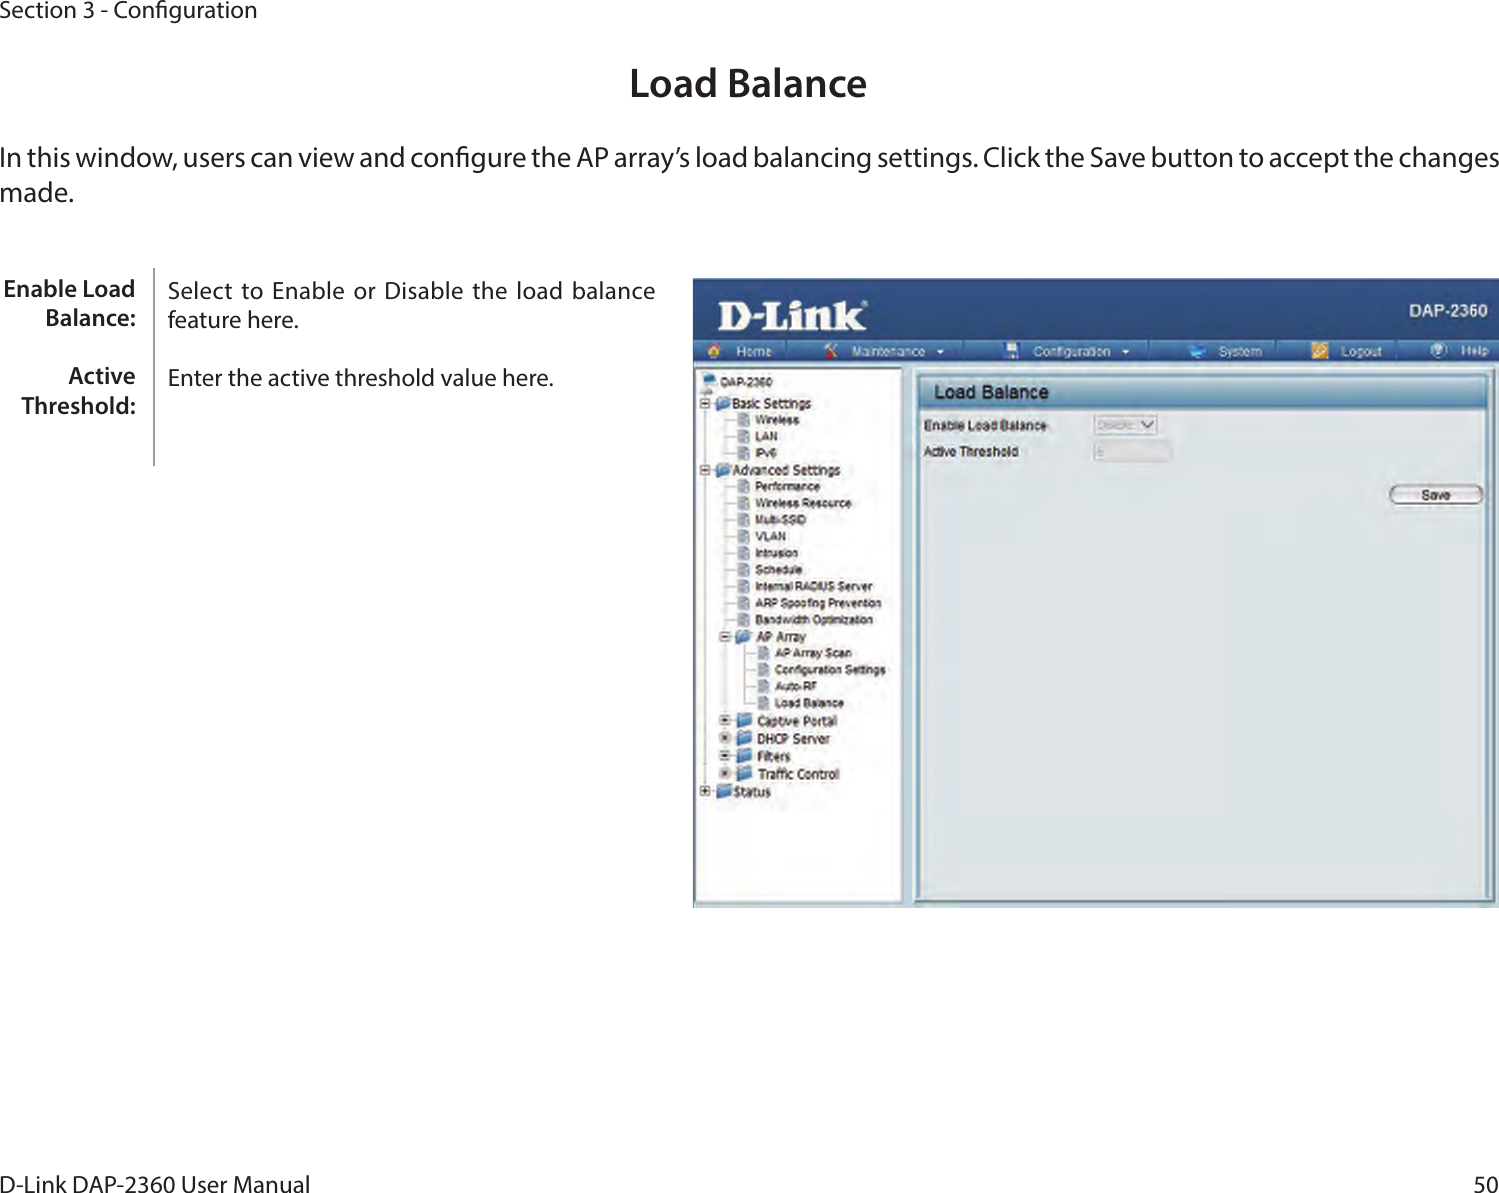 50D-Link DAP-2360 User ManualSection 3 - CongurationLoad BalanceIn this window, users can view and congure the AP array’s load balancing settings. Click the Save button to accept the changes made.Select  to Enable or Disable the  load balance feature here.Enter the active threshold value here.Enable Load Balance:Active Threshold: